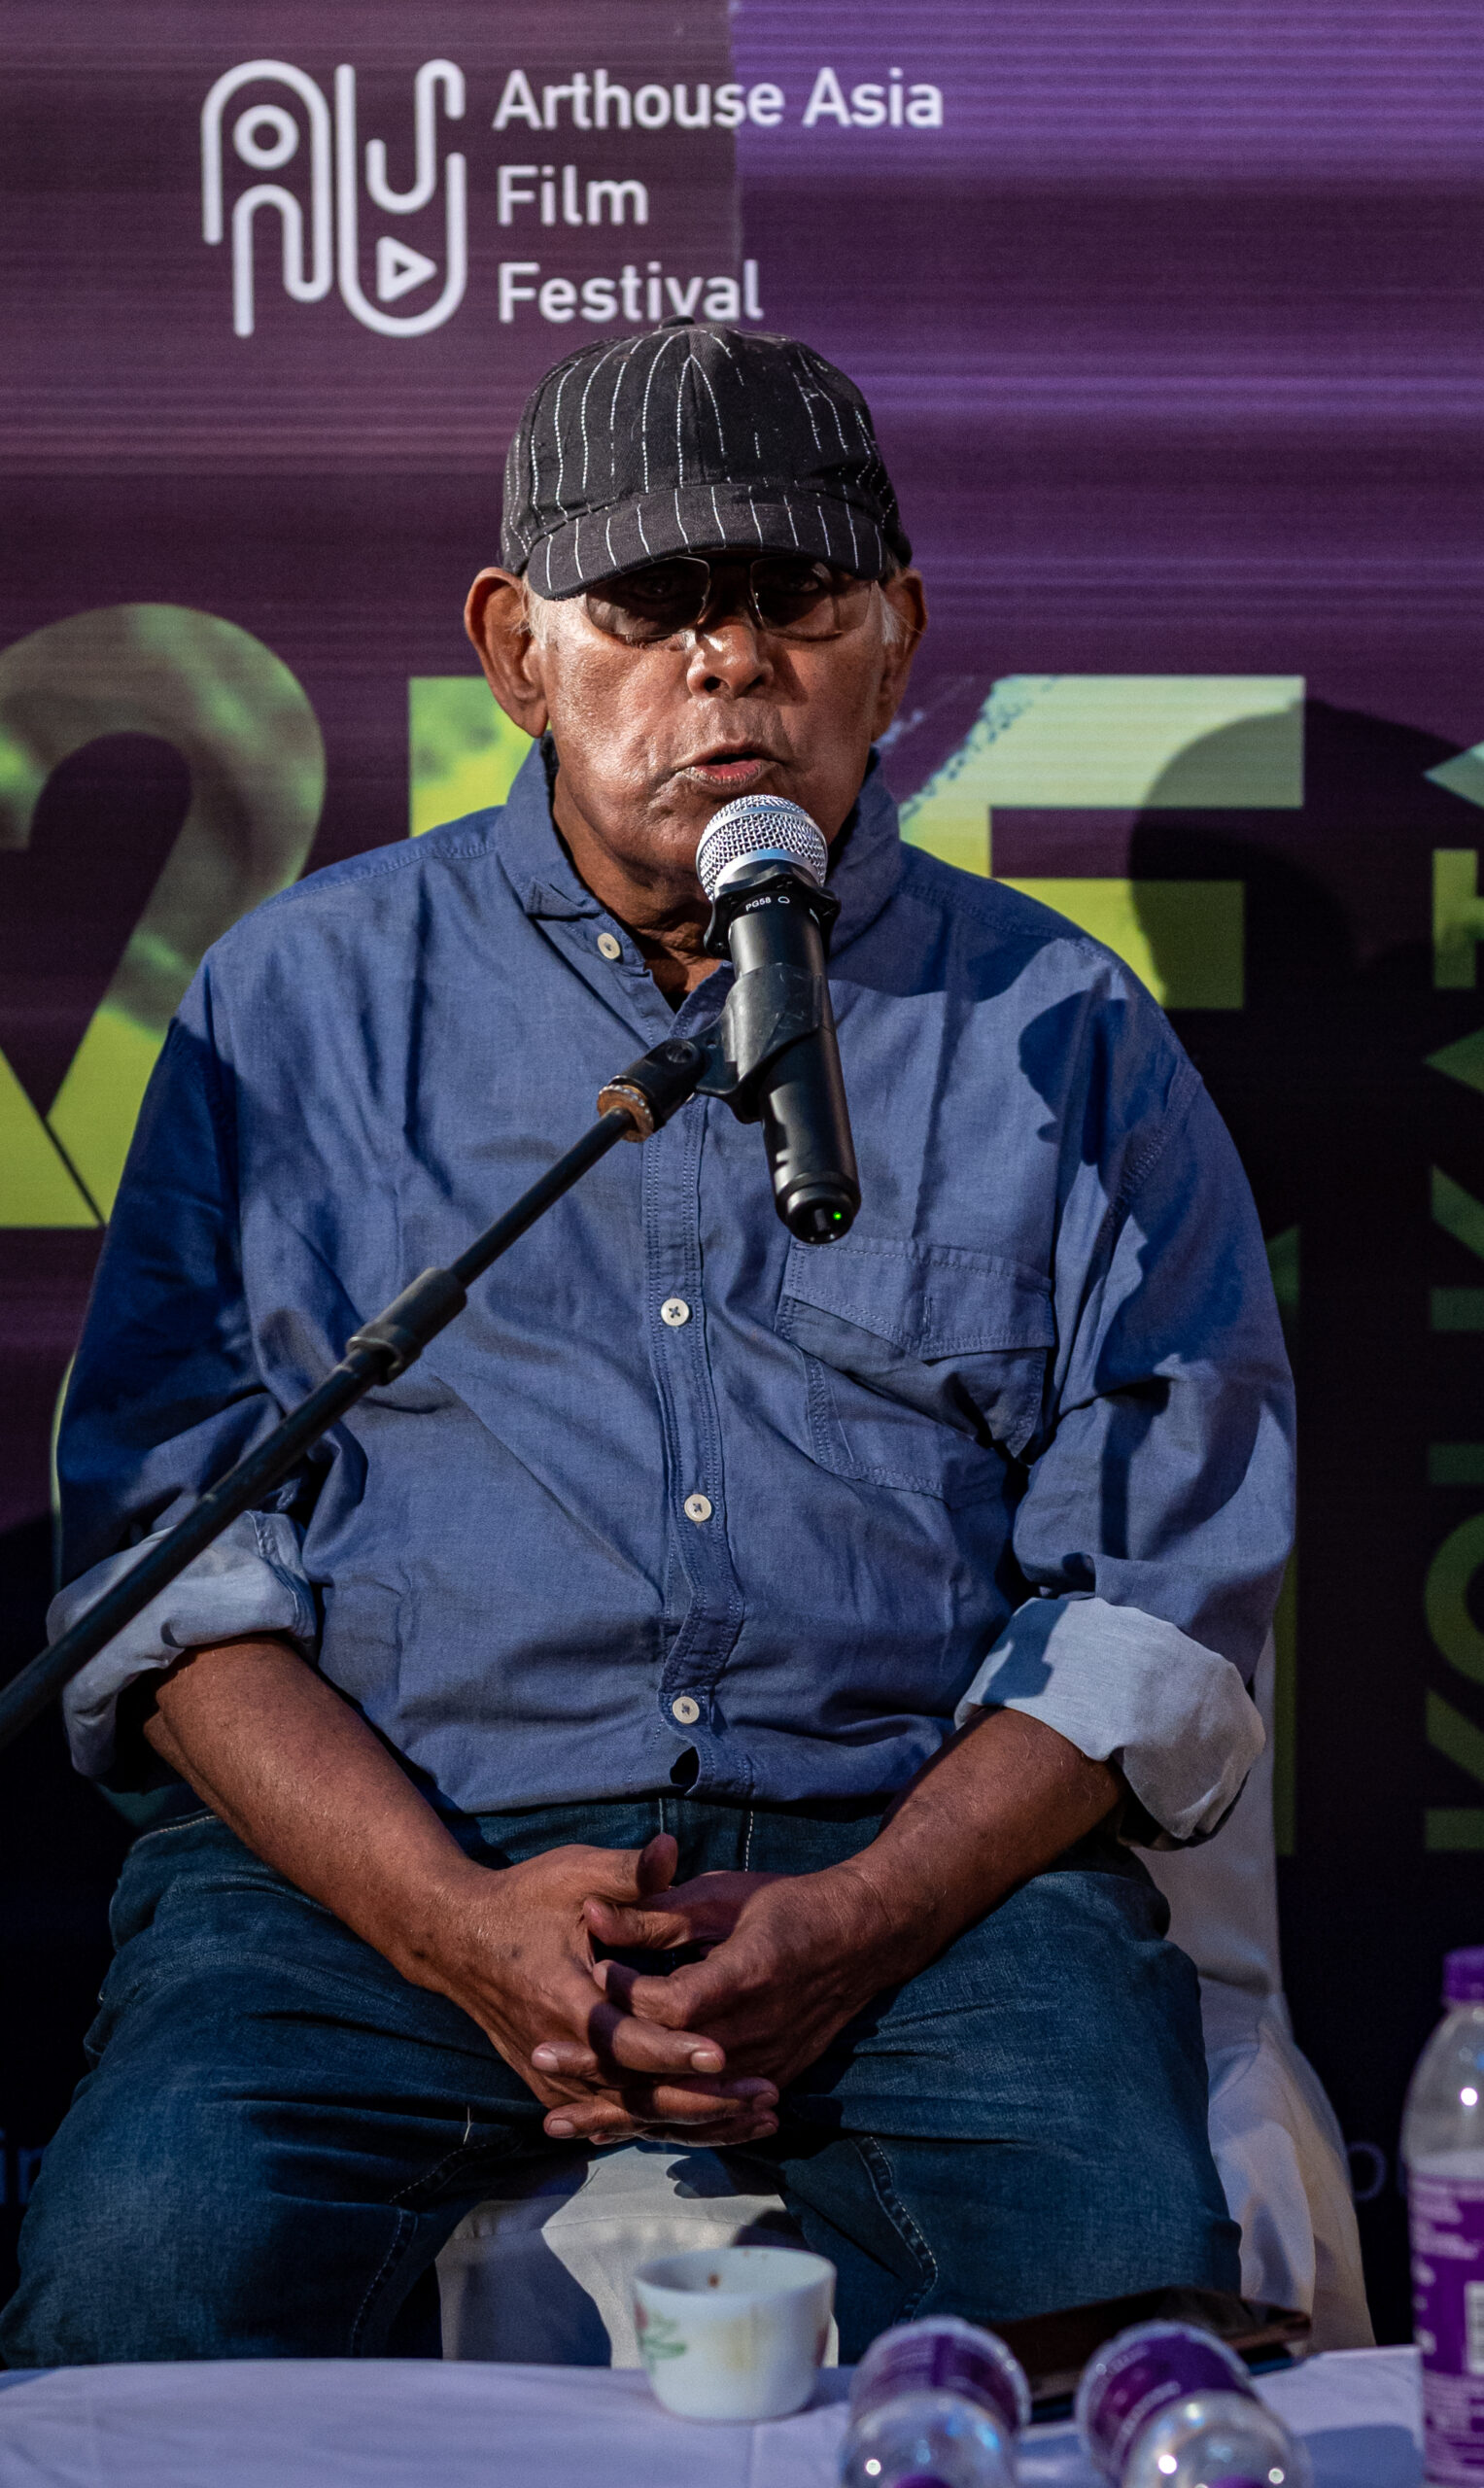 A man speaks at a public event